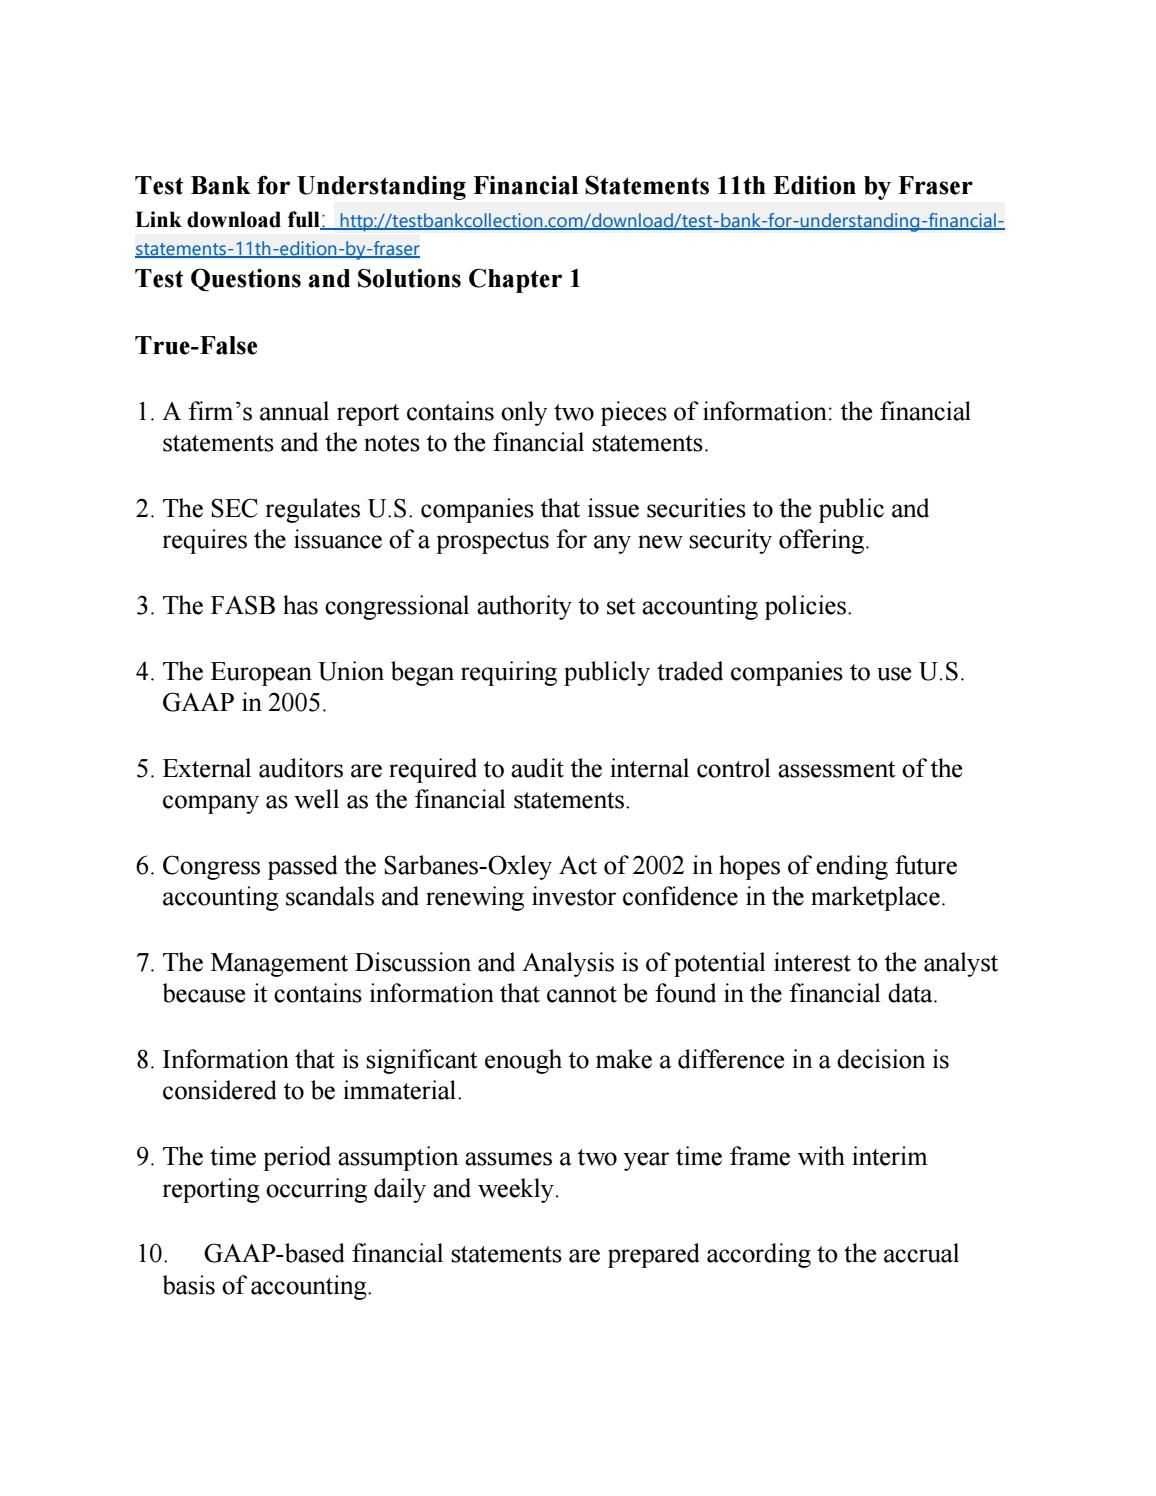 Pin On Test Bank For Understanding Financial Statements 11Th Within Forensic Accounting Report Template